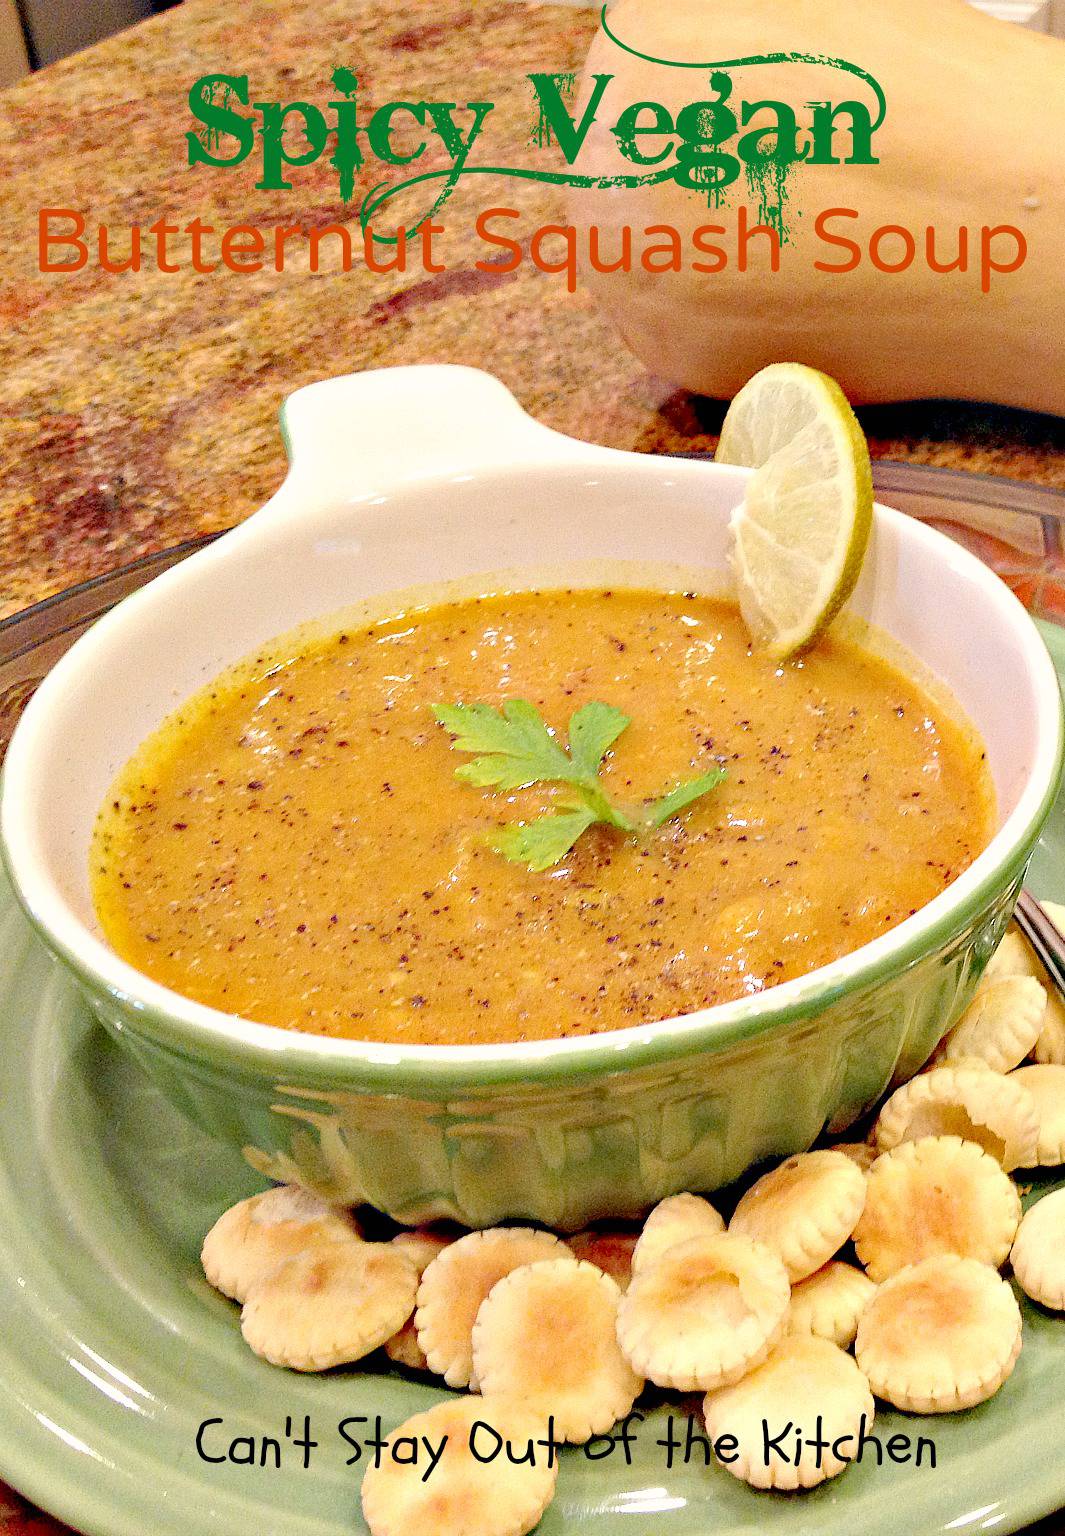 Spicy Vegan Butternut Squash Soup - Can't Stay Out of the Kitchen